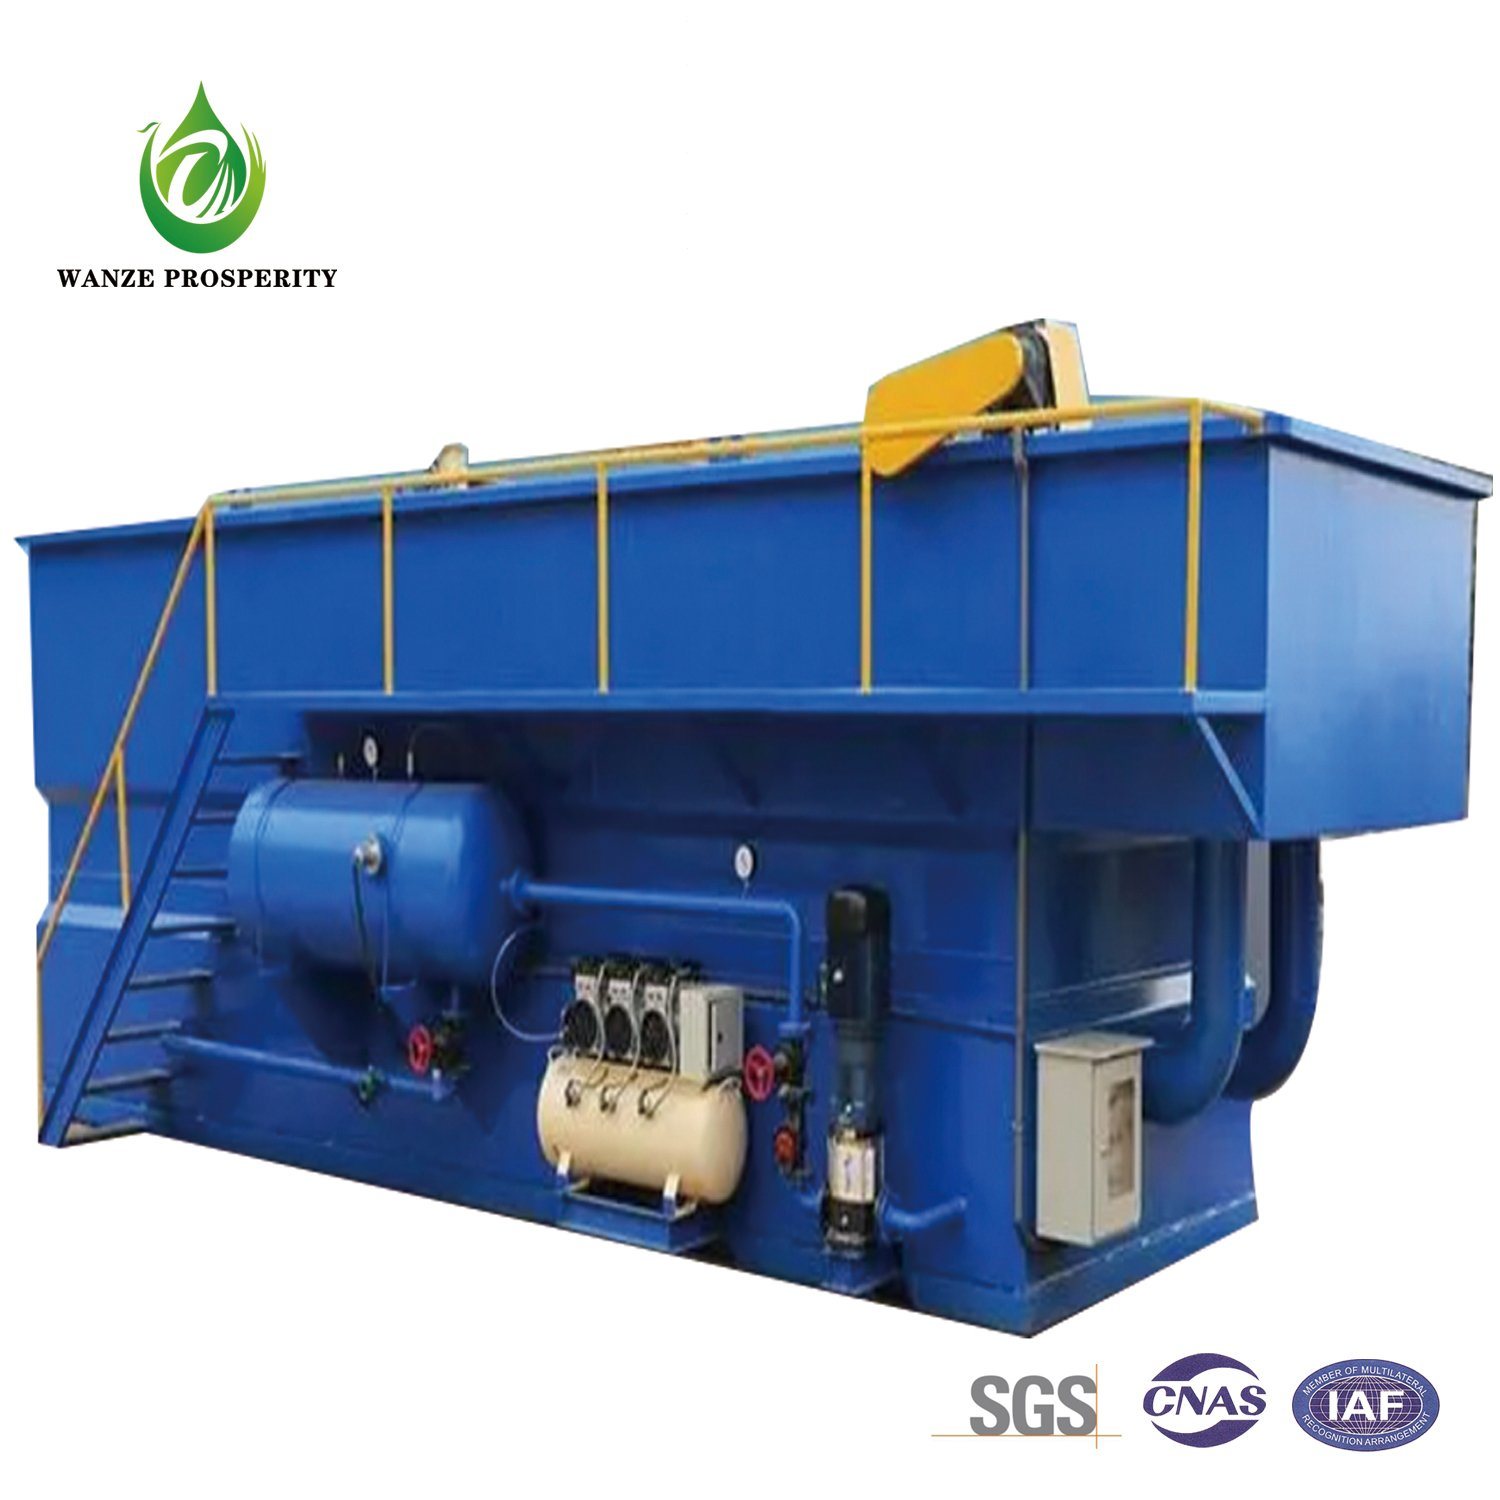 
                Chemical Wastewater Slaughtering Wastewater Organic Sewage Treatment Equipment
    